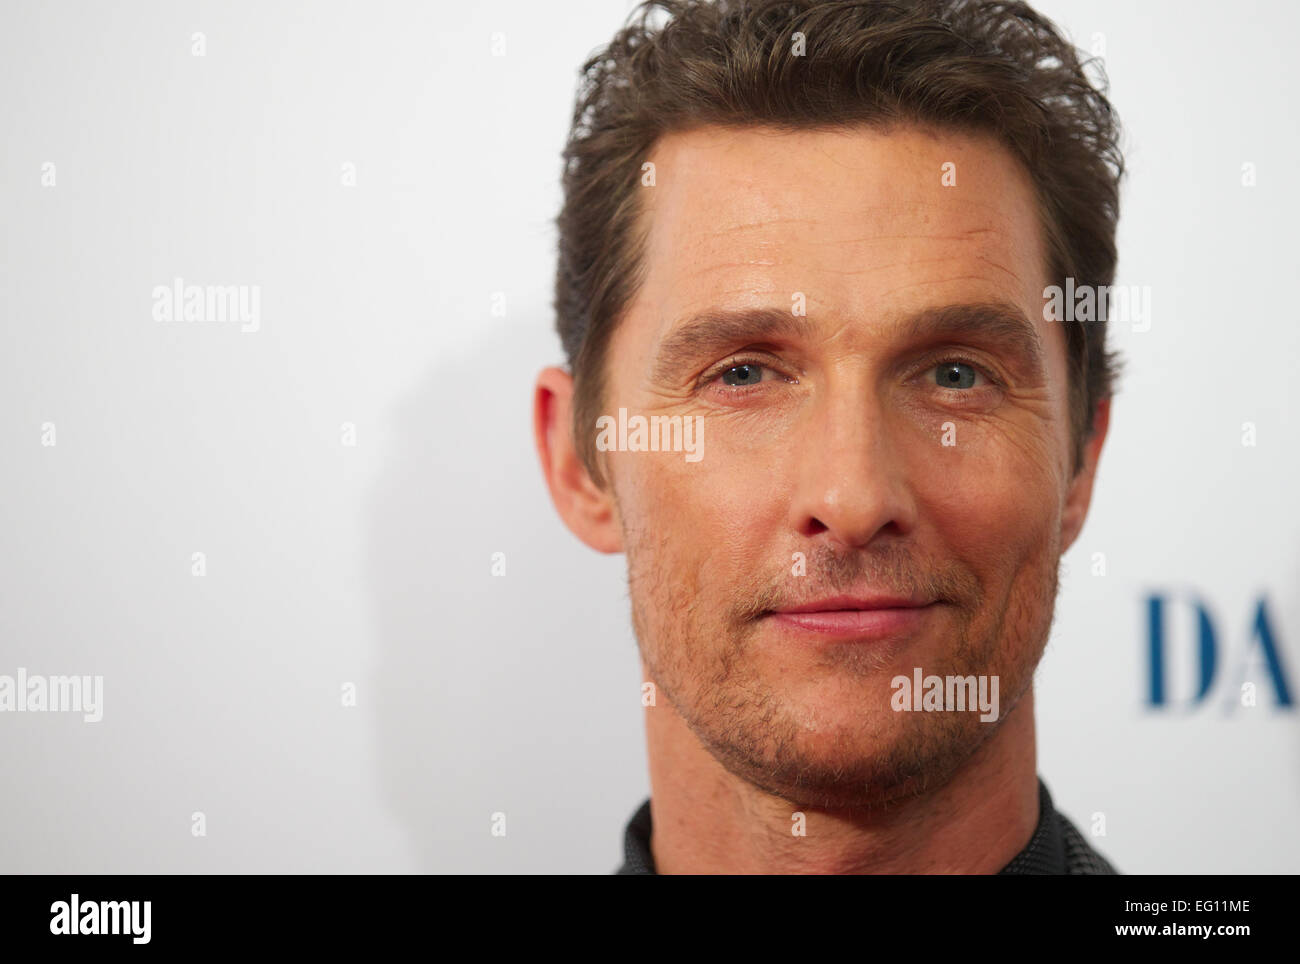 UNITED KINGDOM, London : American Actor Matthew McConaughey poses for pictures upon arrival to attend the European premier of 'Dallas Buyers Club: in central London on January 29, 2014. Stock Photo